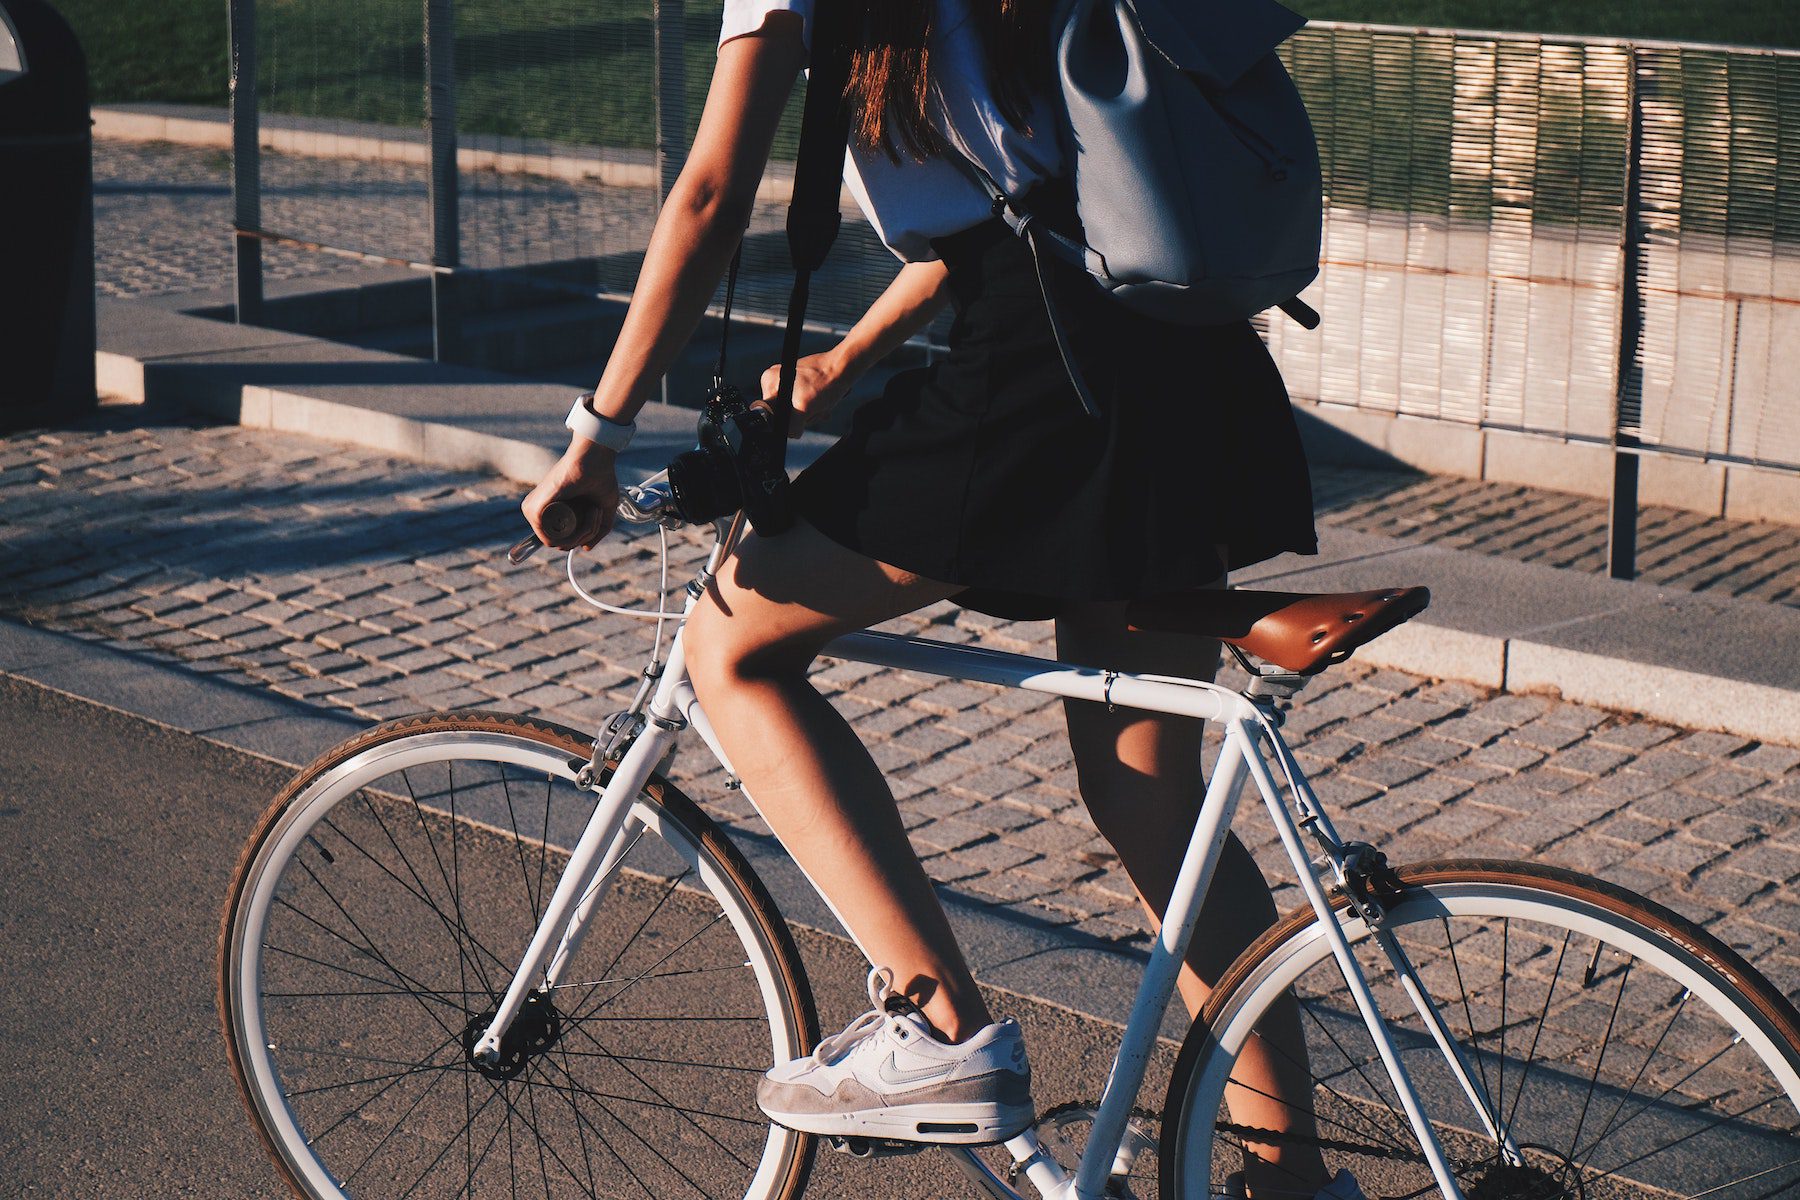 A girl in a black skirt and whit shirt wearing a small blue backpack rides a white bicycle on a paved road alongside a brick sidewalk 